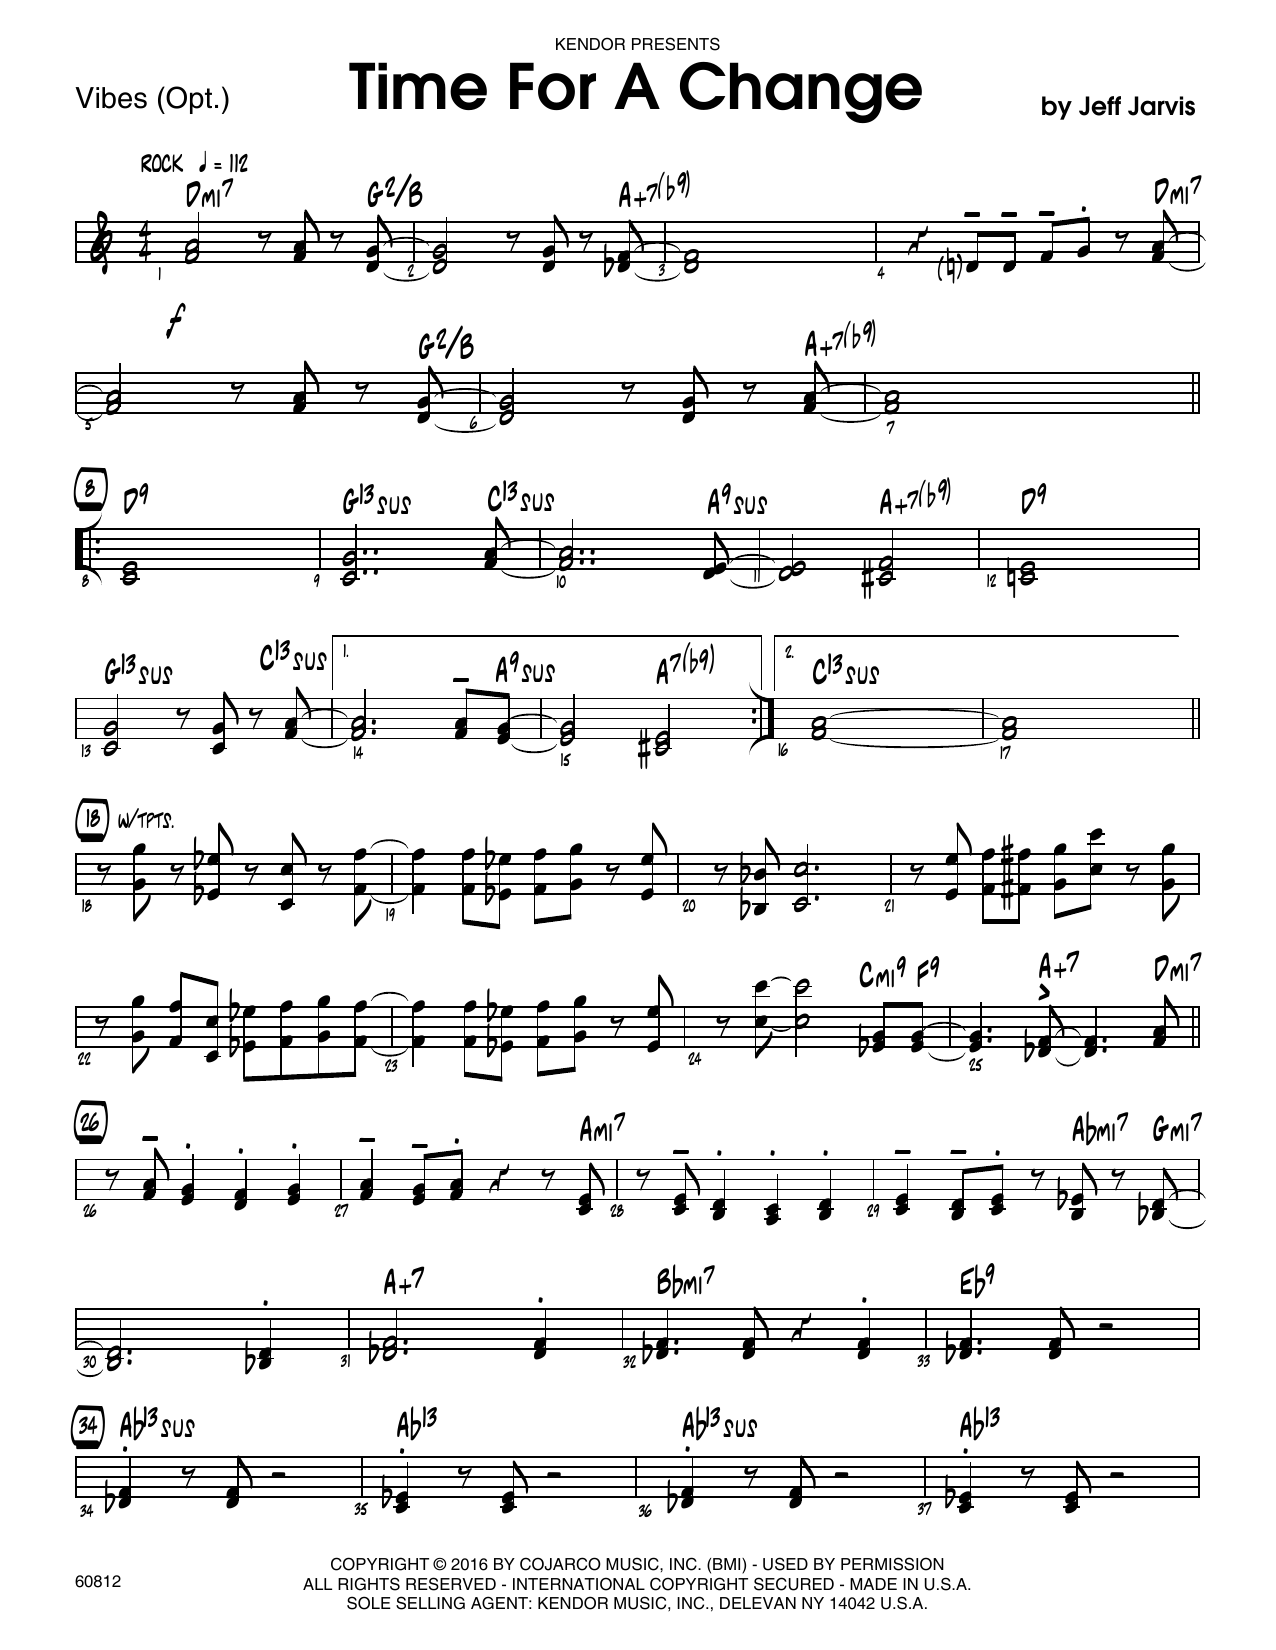 Download Jeff Jarvis Time For A Change - Vibes Sheet Music